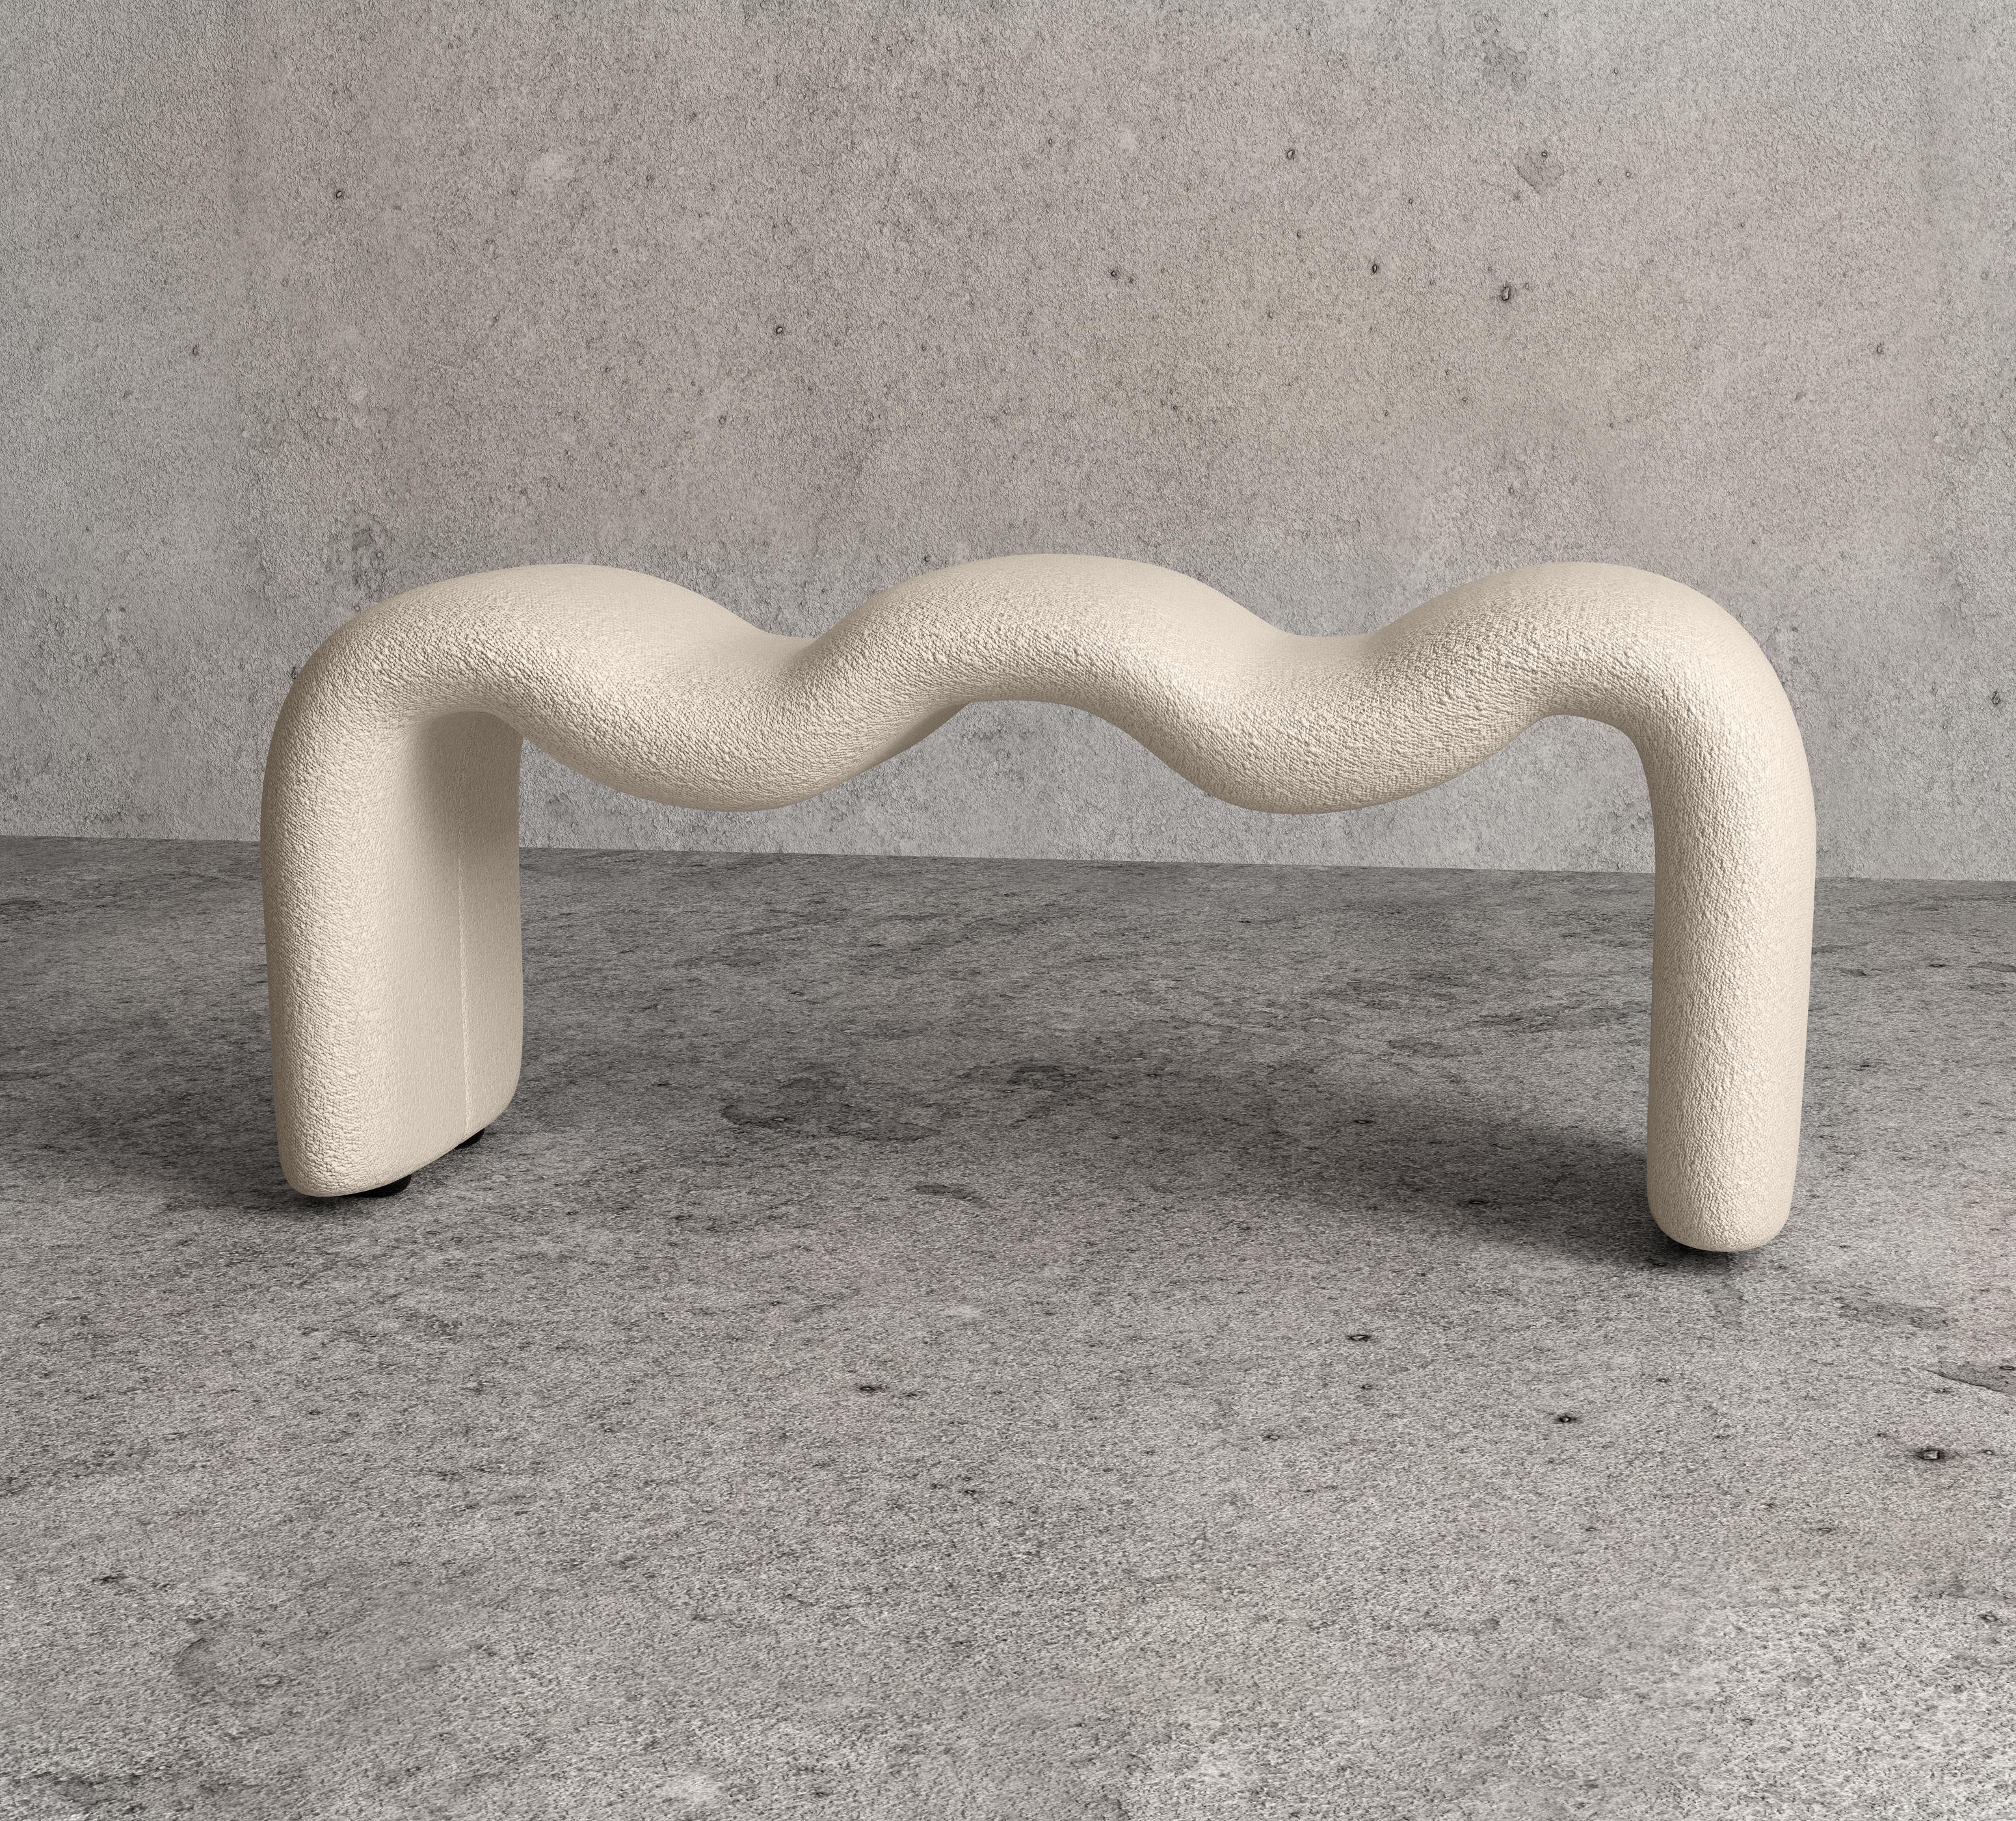 Hand-Crafted Koki Design House Squiggle Bench